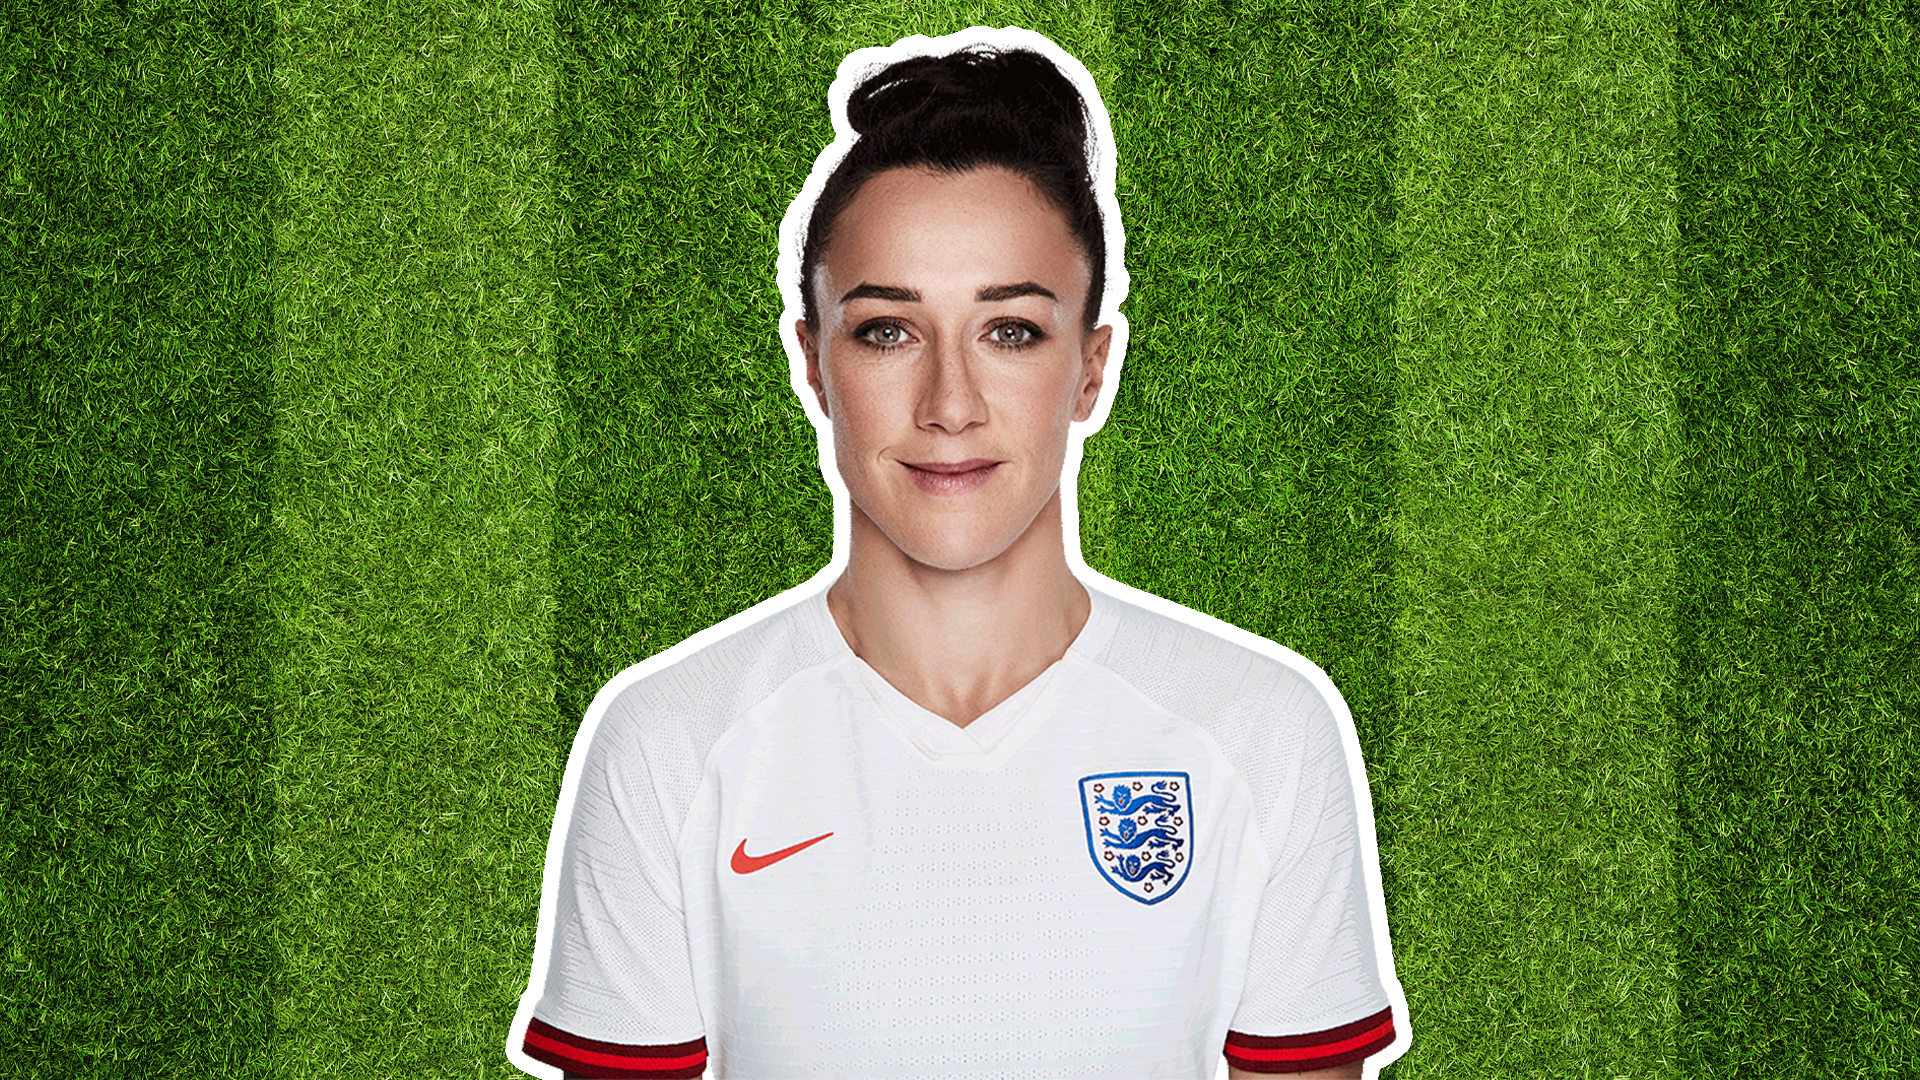 England player Lucy Bronze